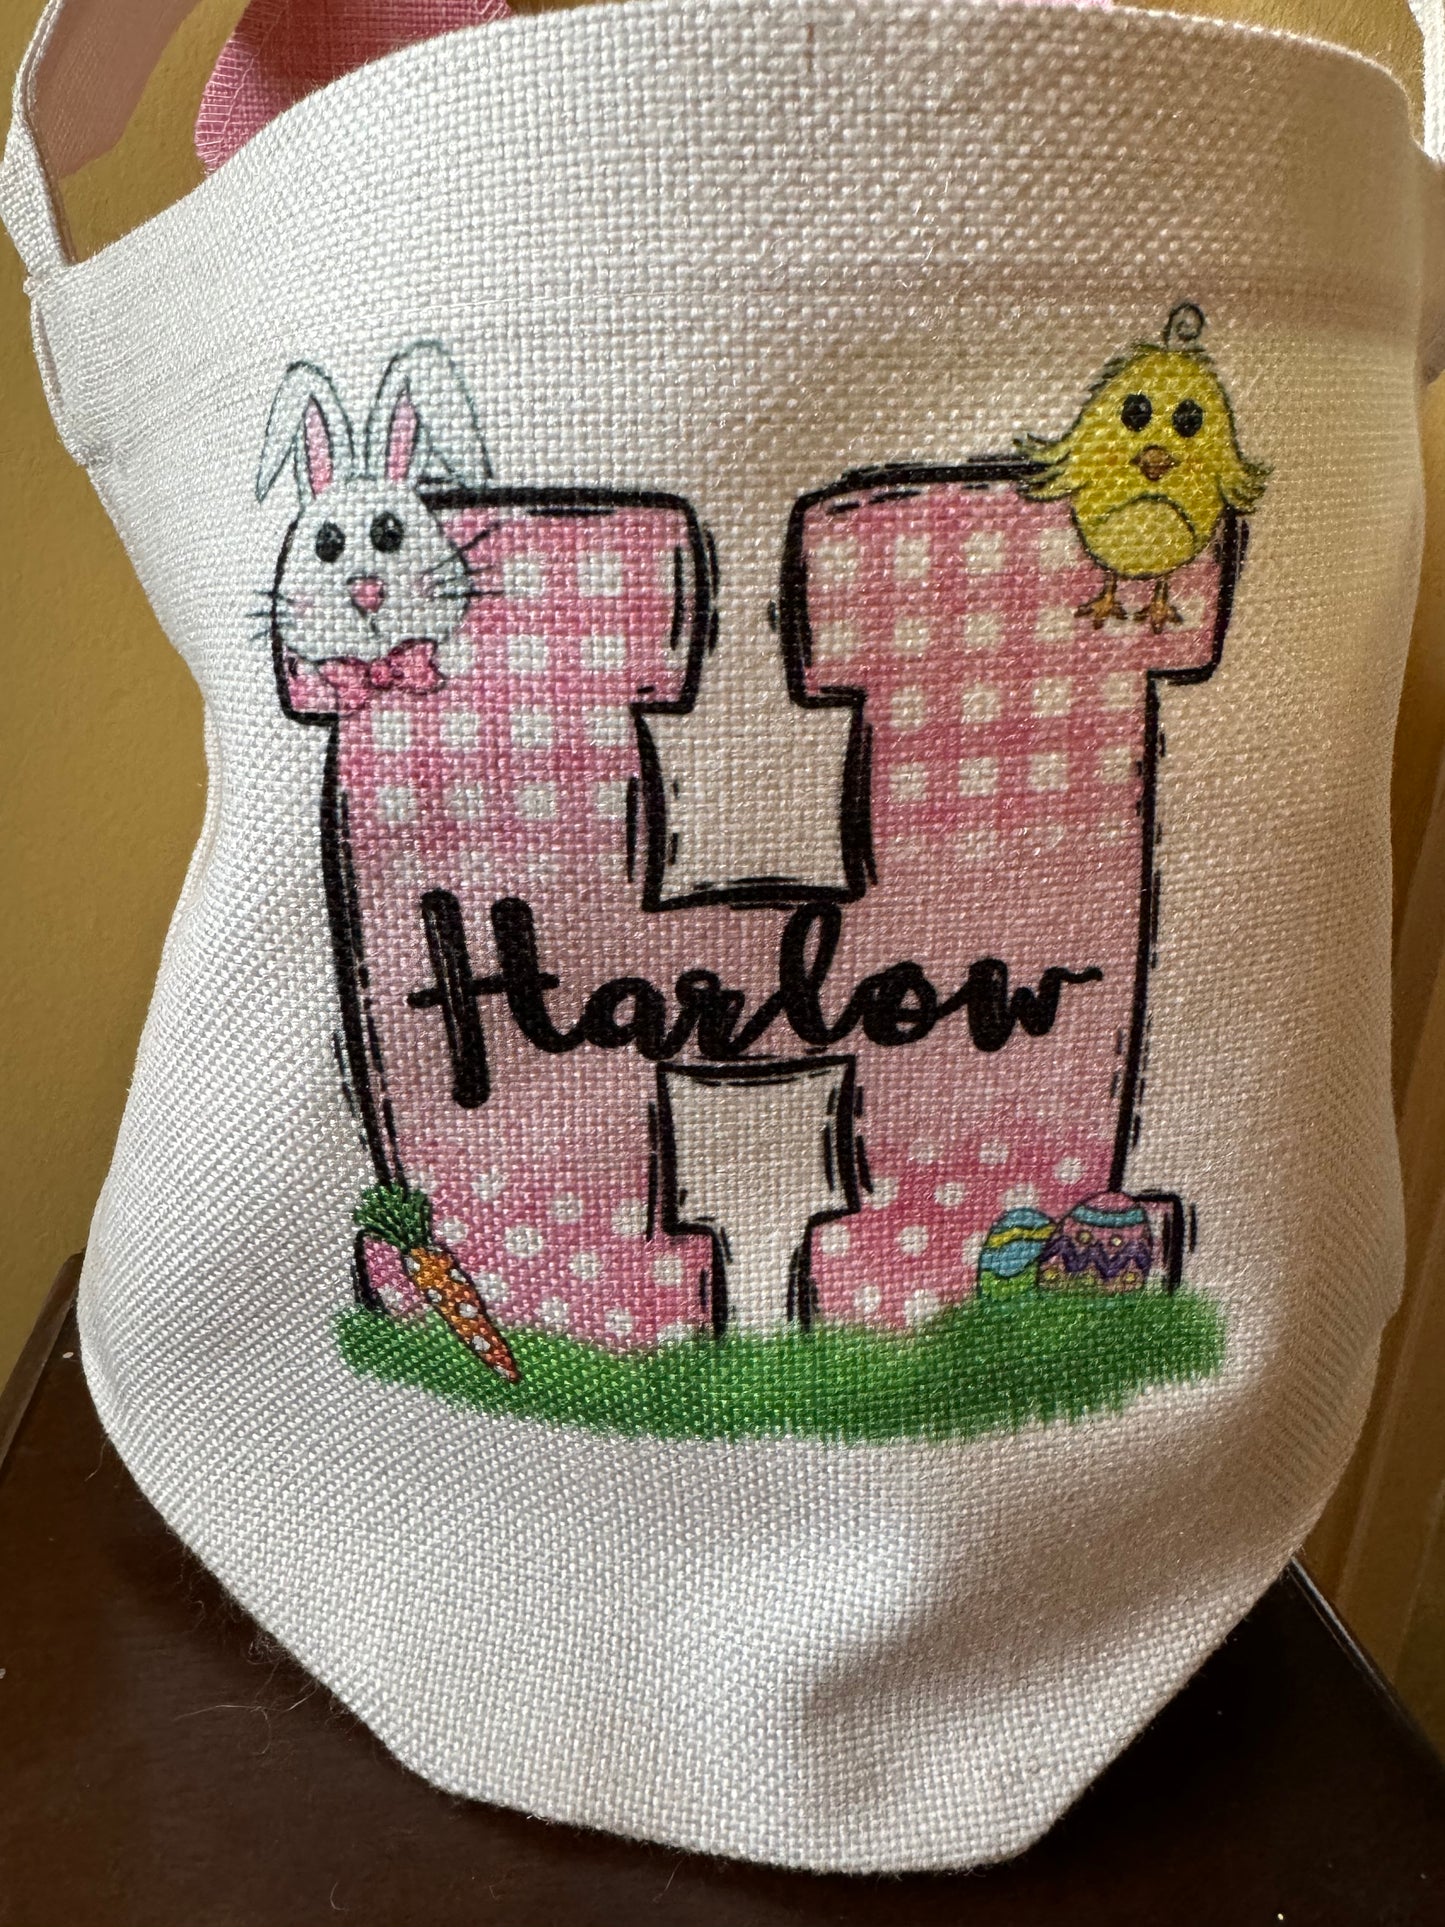 Personalized Easter basket